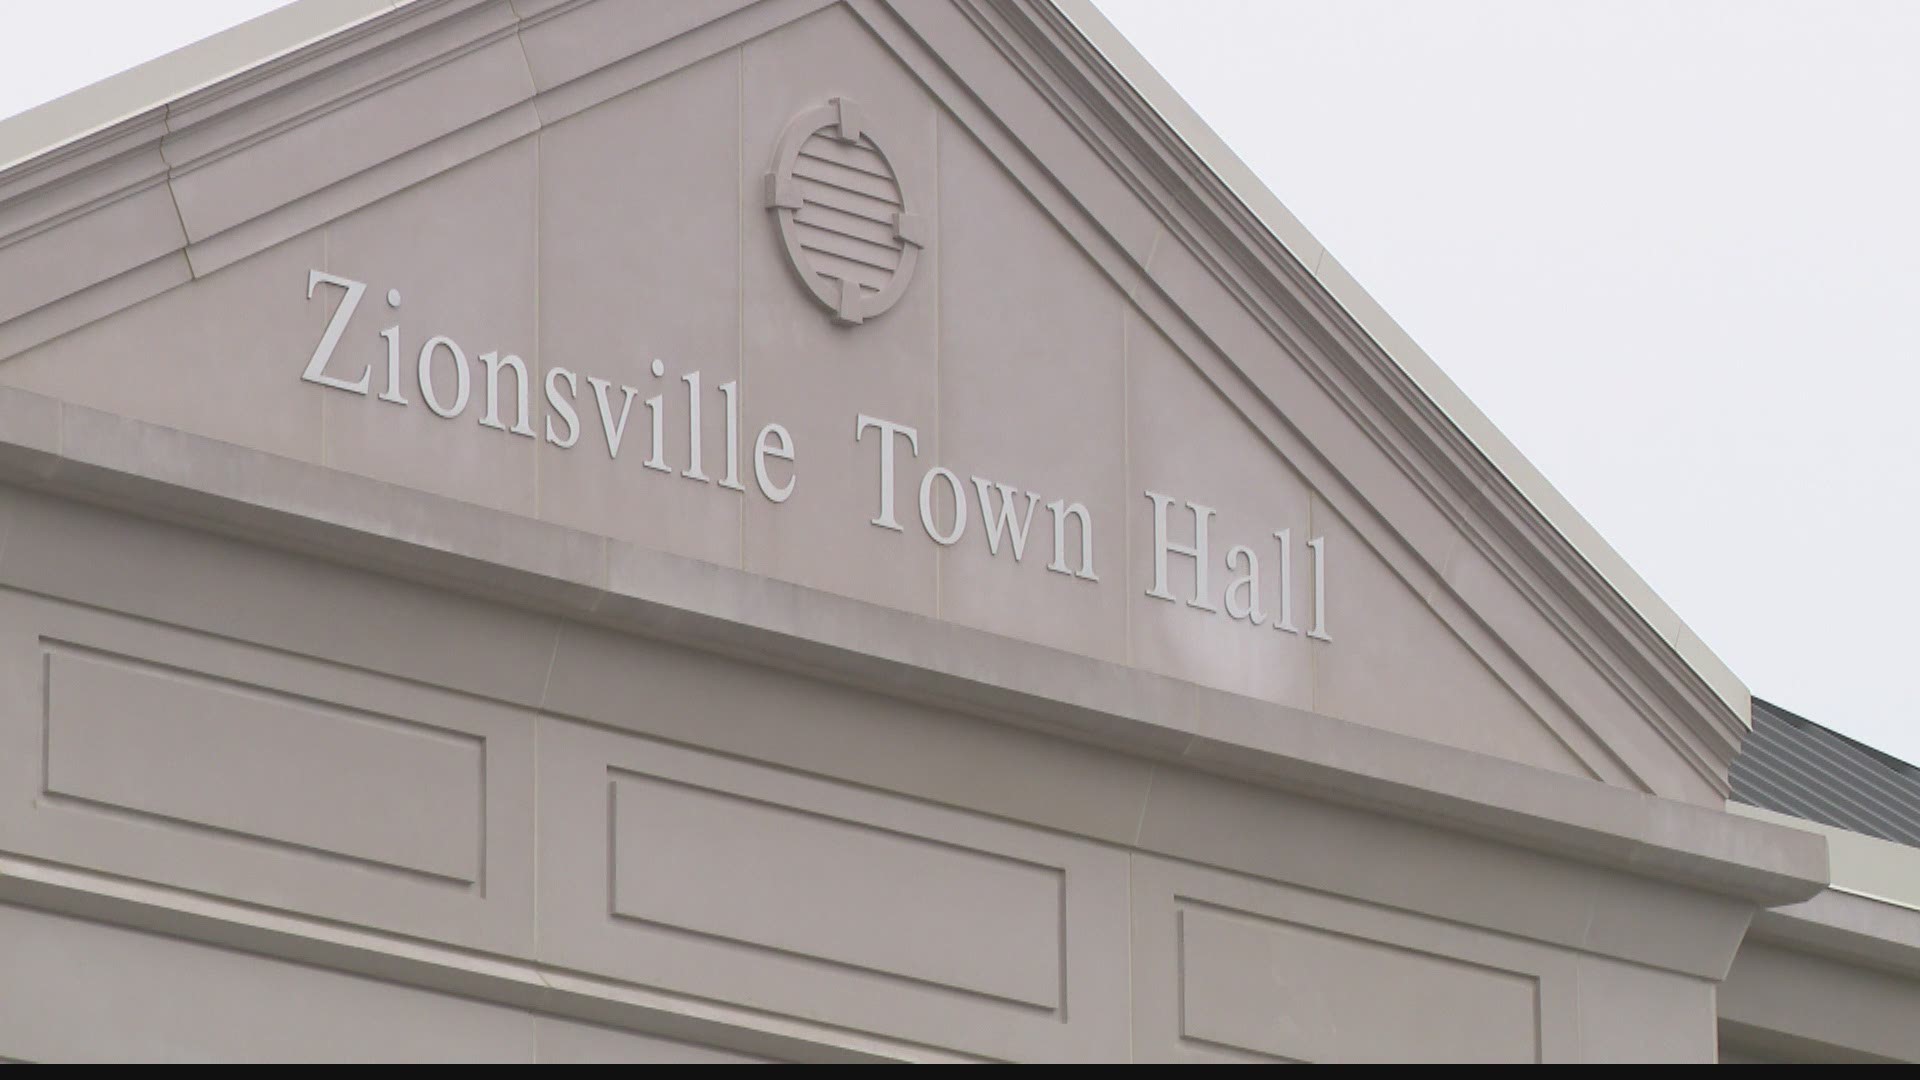 A small town government feud is winding up in court. The mayor of Zionsville wants to replace the fire chief.